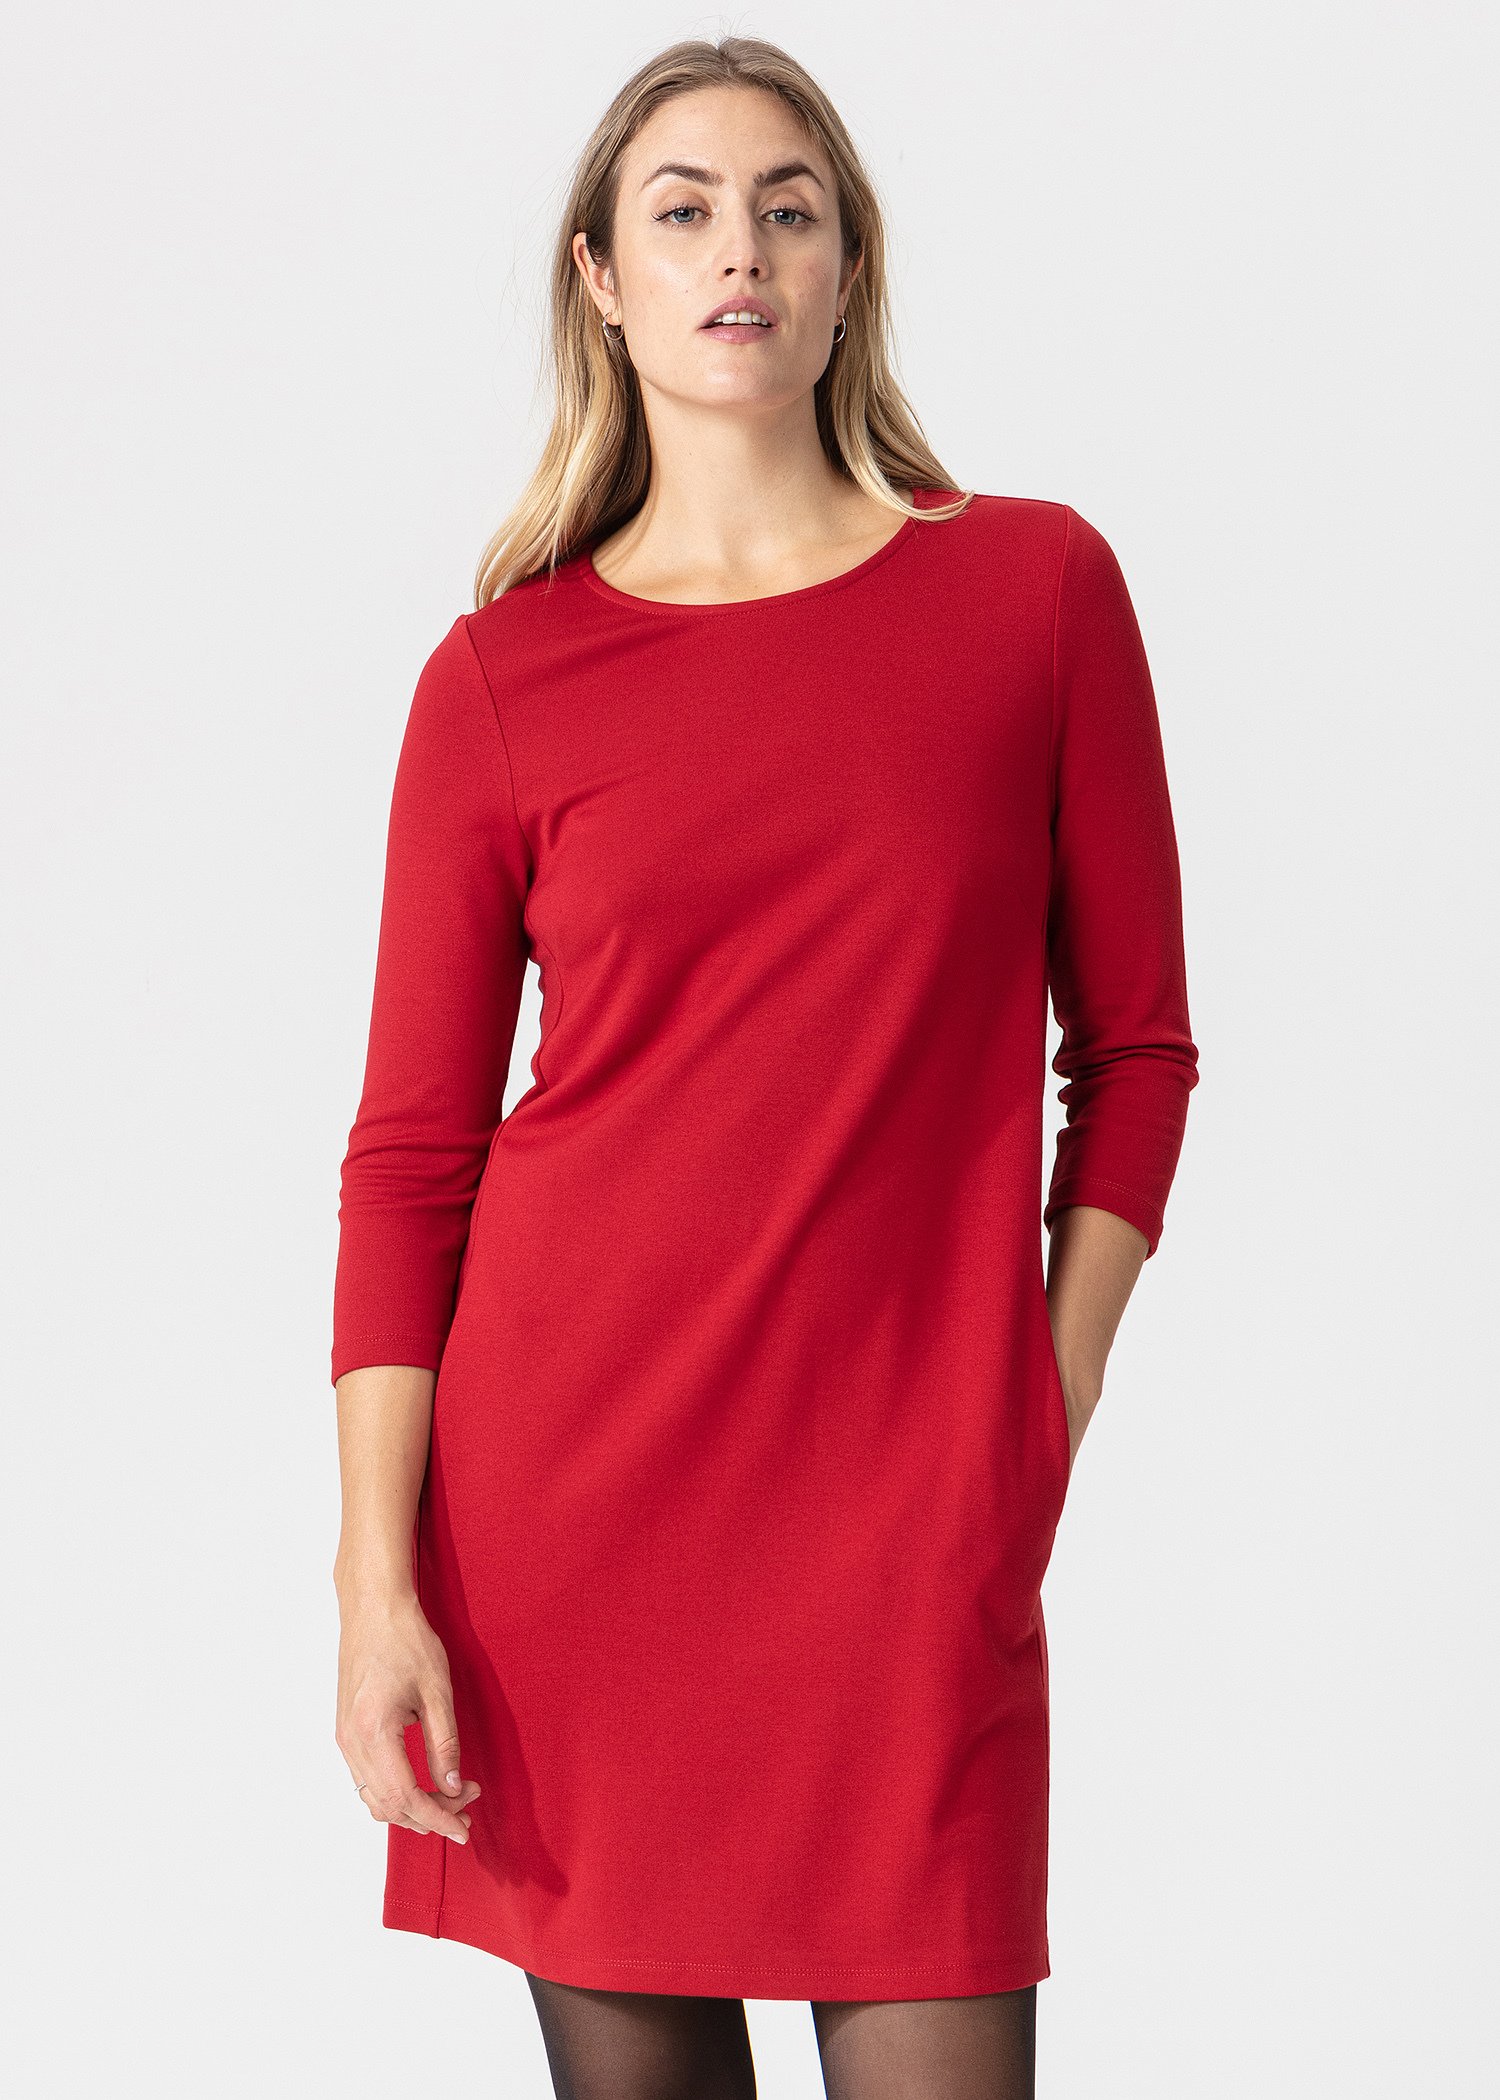 Red 3/4 sleeved tunic